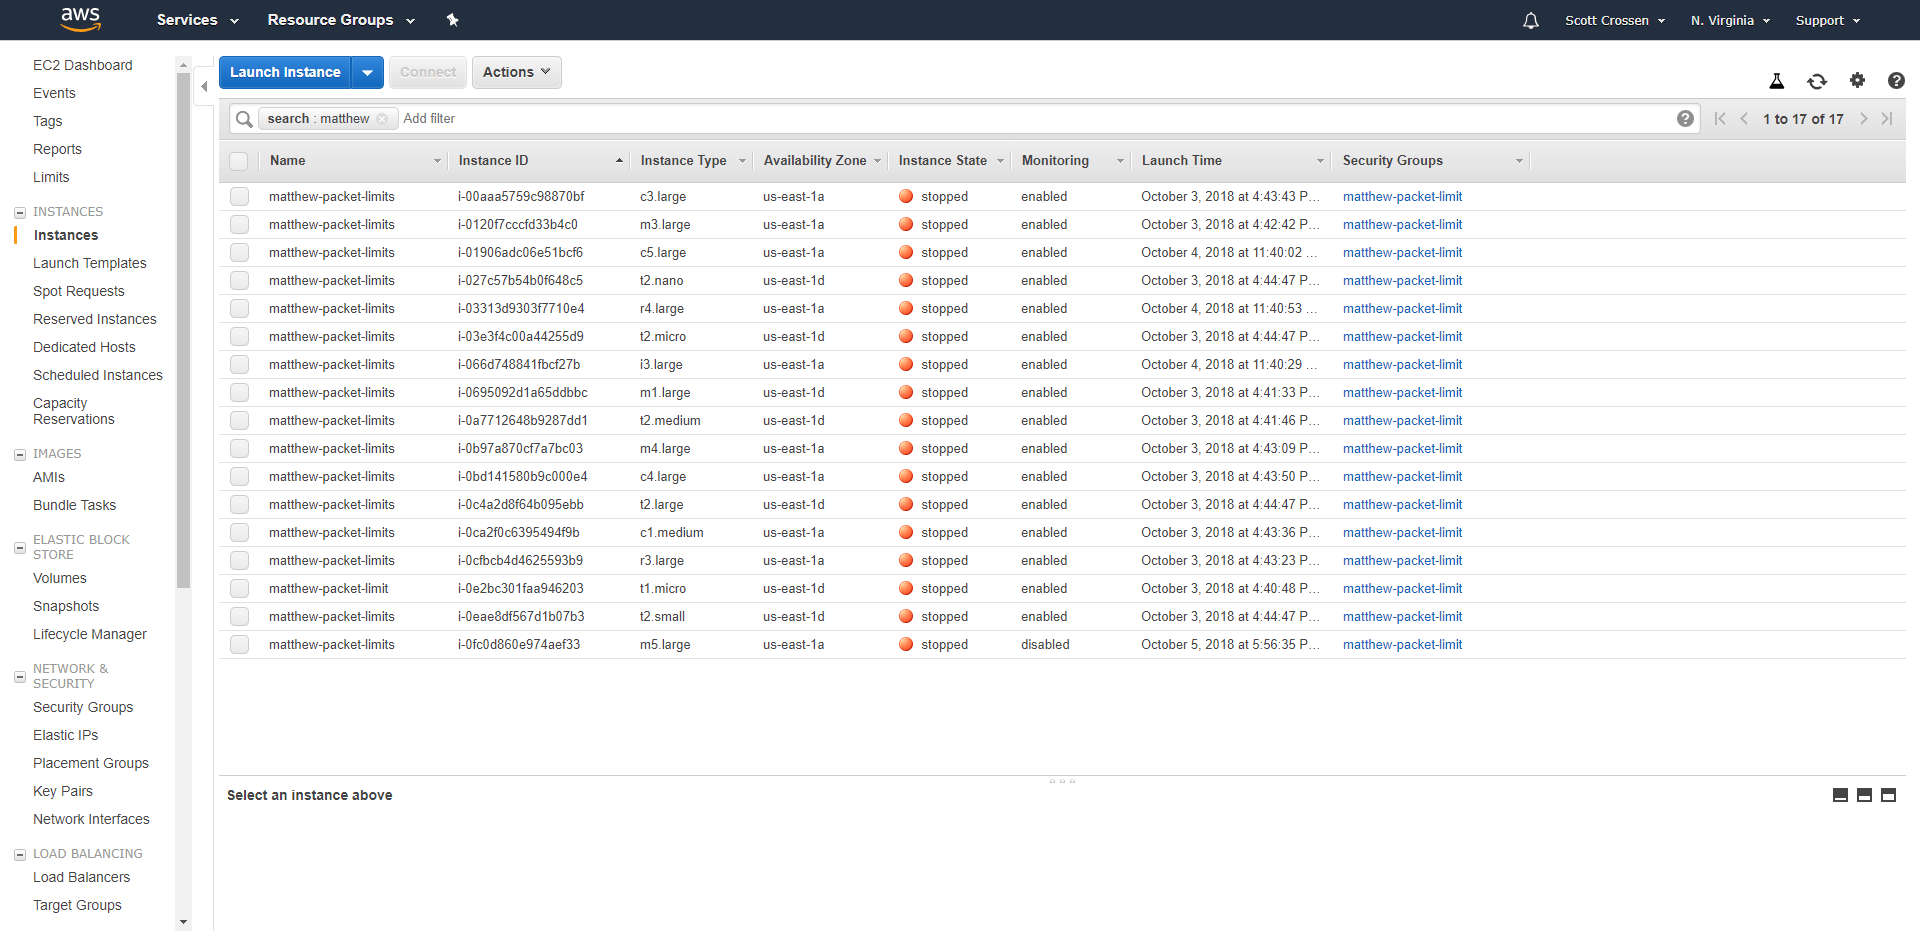 EC2 console with missing data